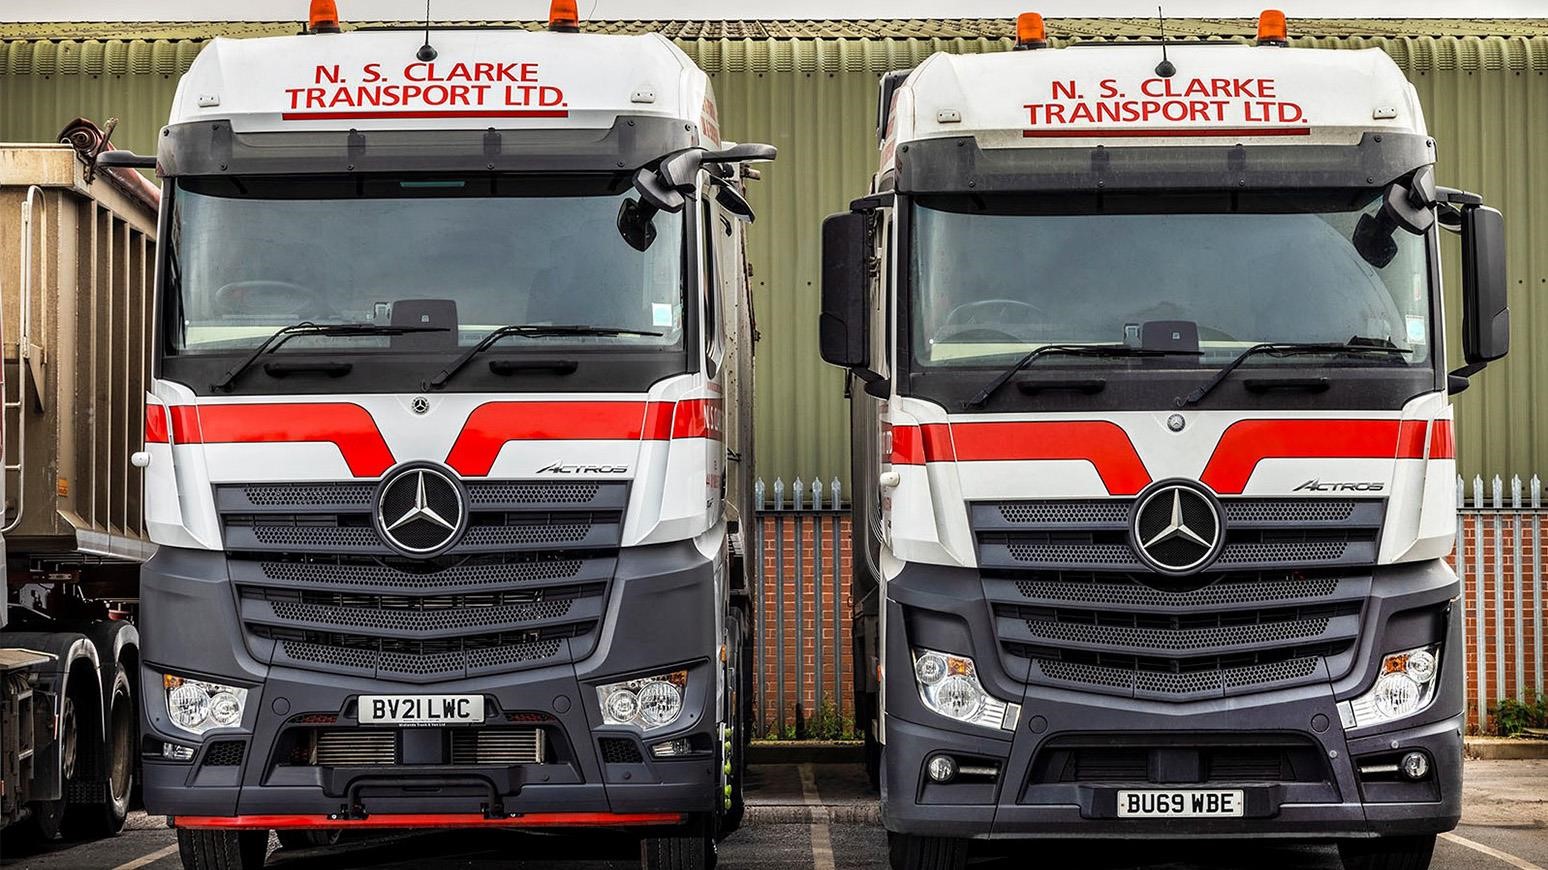 NS Clarke Transport Mercedes-Benz Actros Tractor Units Borrow Durability Features From Arocs Range